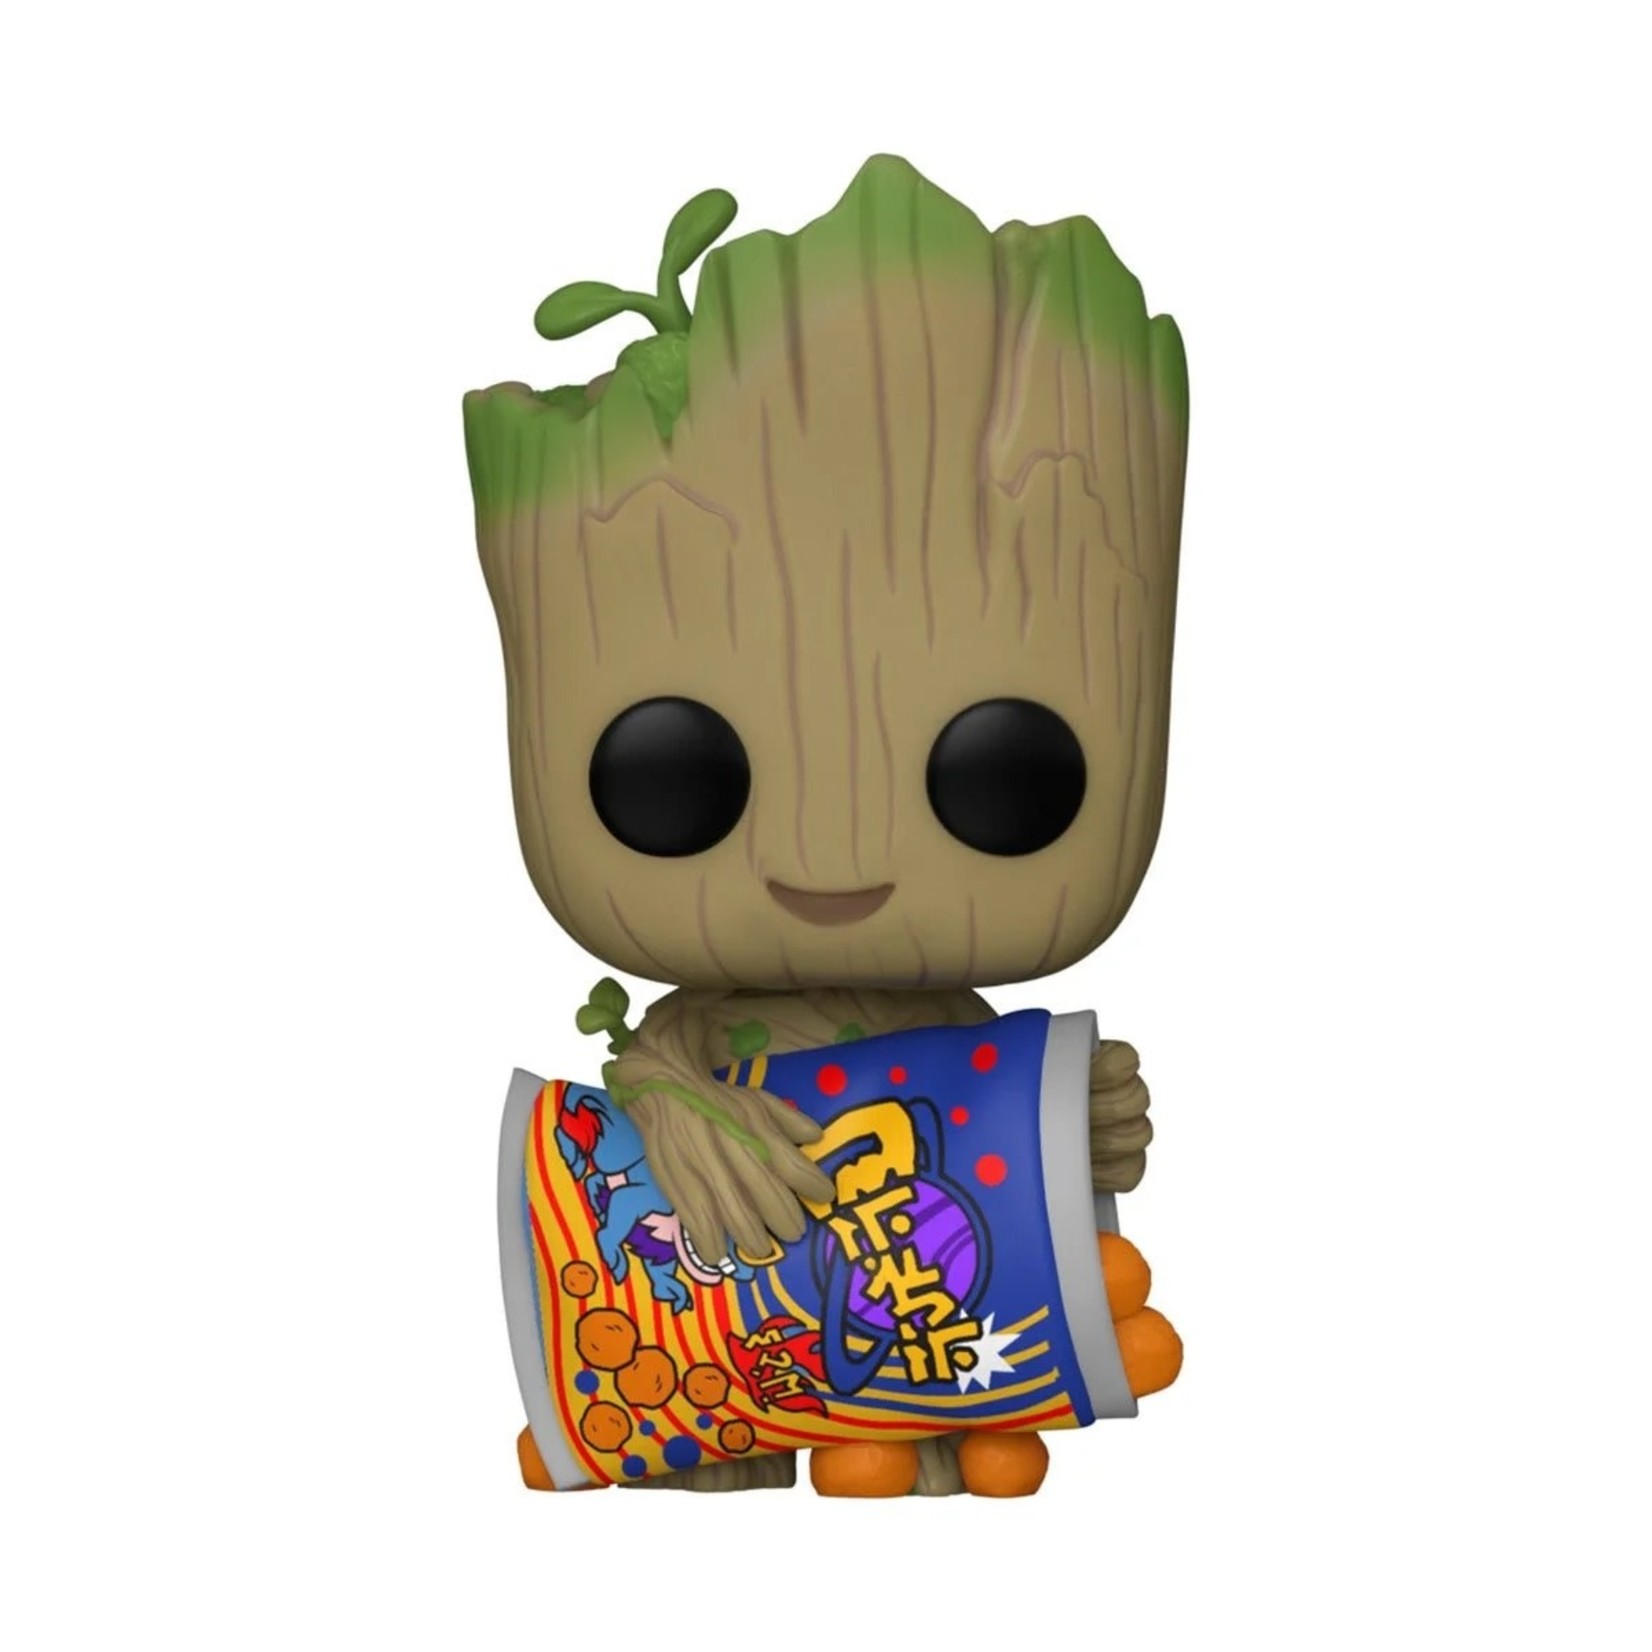 Funko Funko POP! Marvel: I Am Groot - Groot with Cheese Puffs